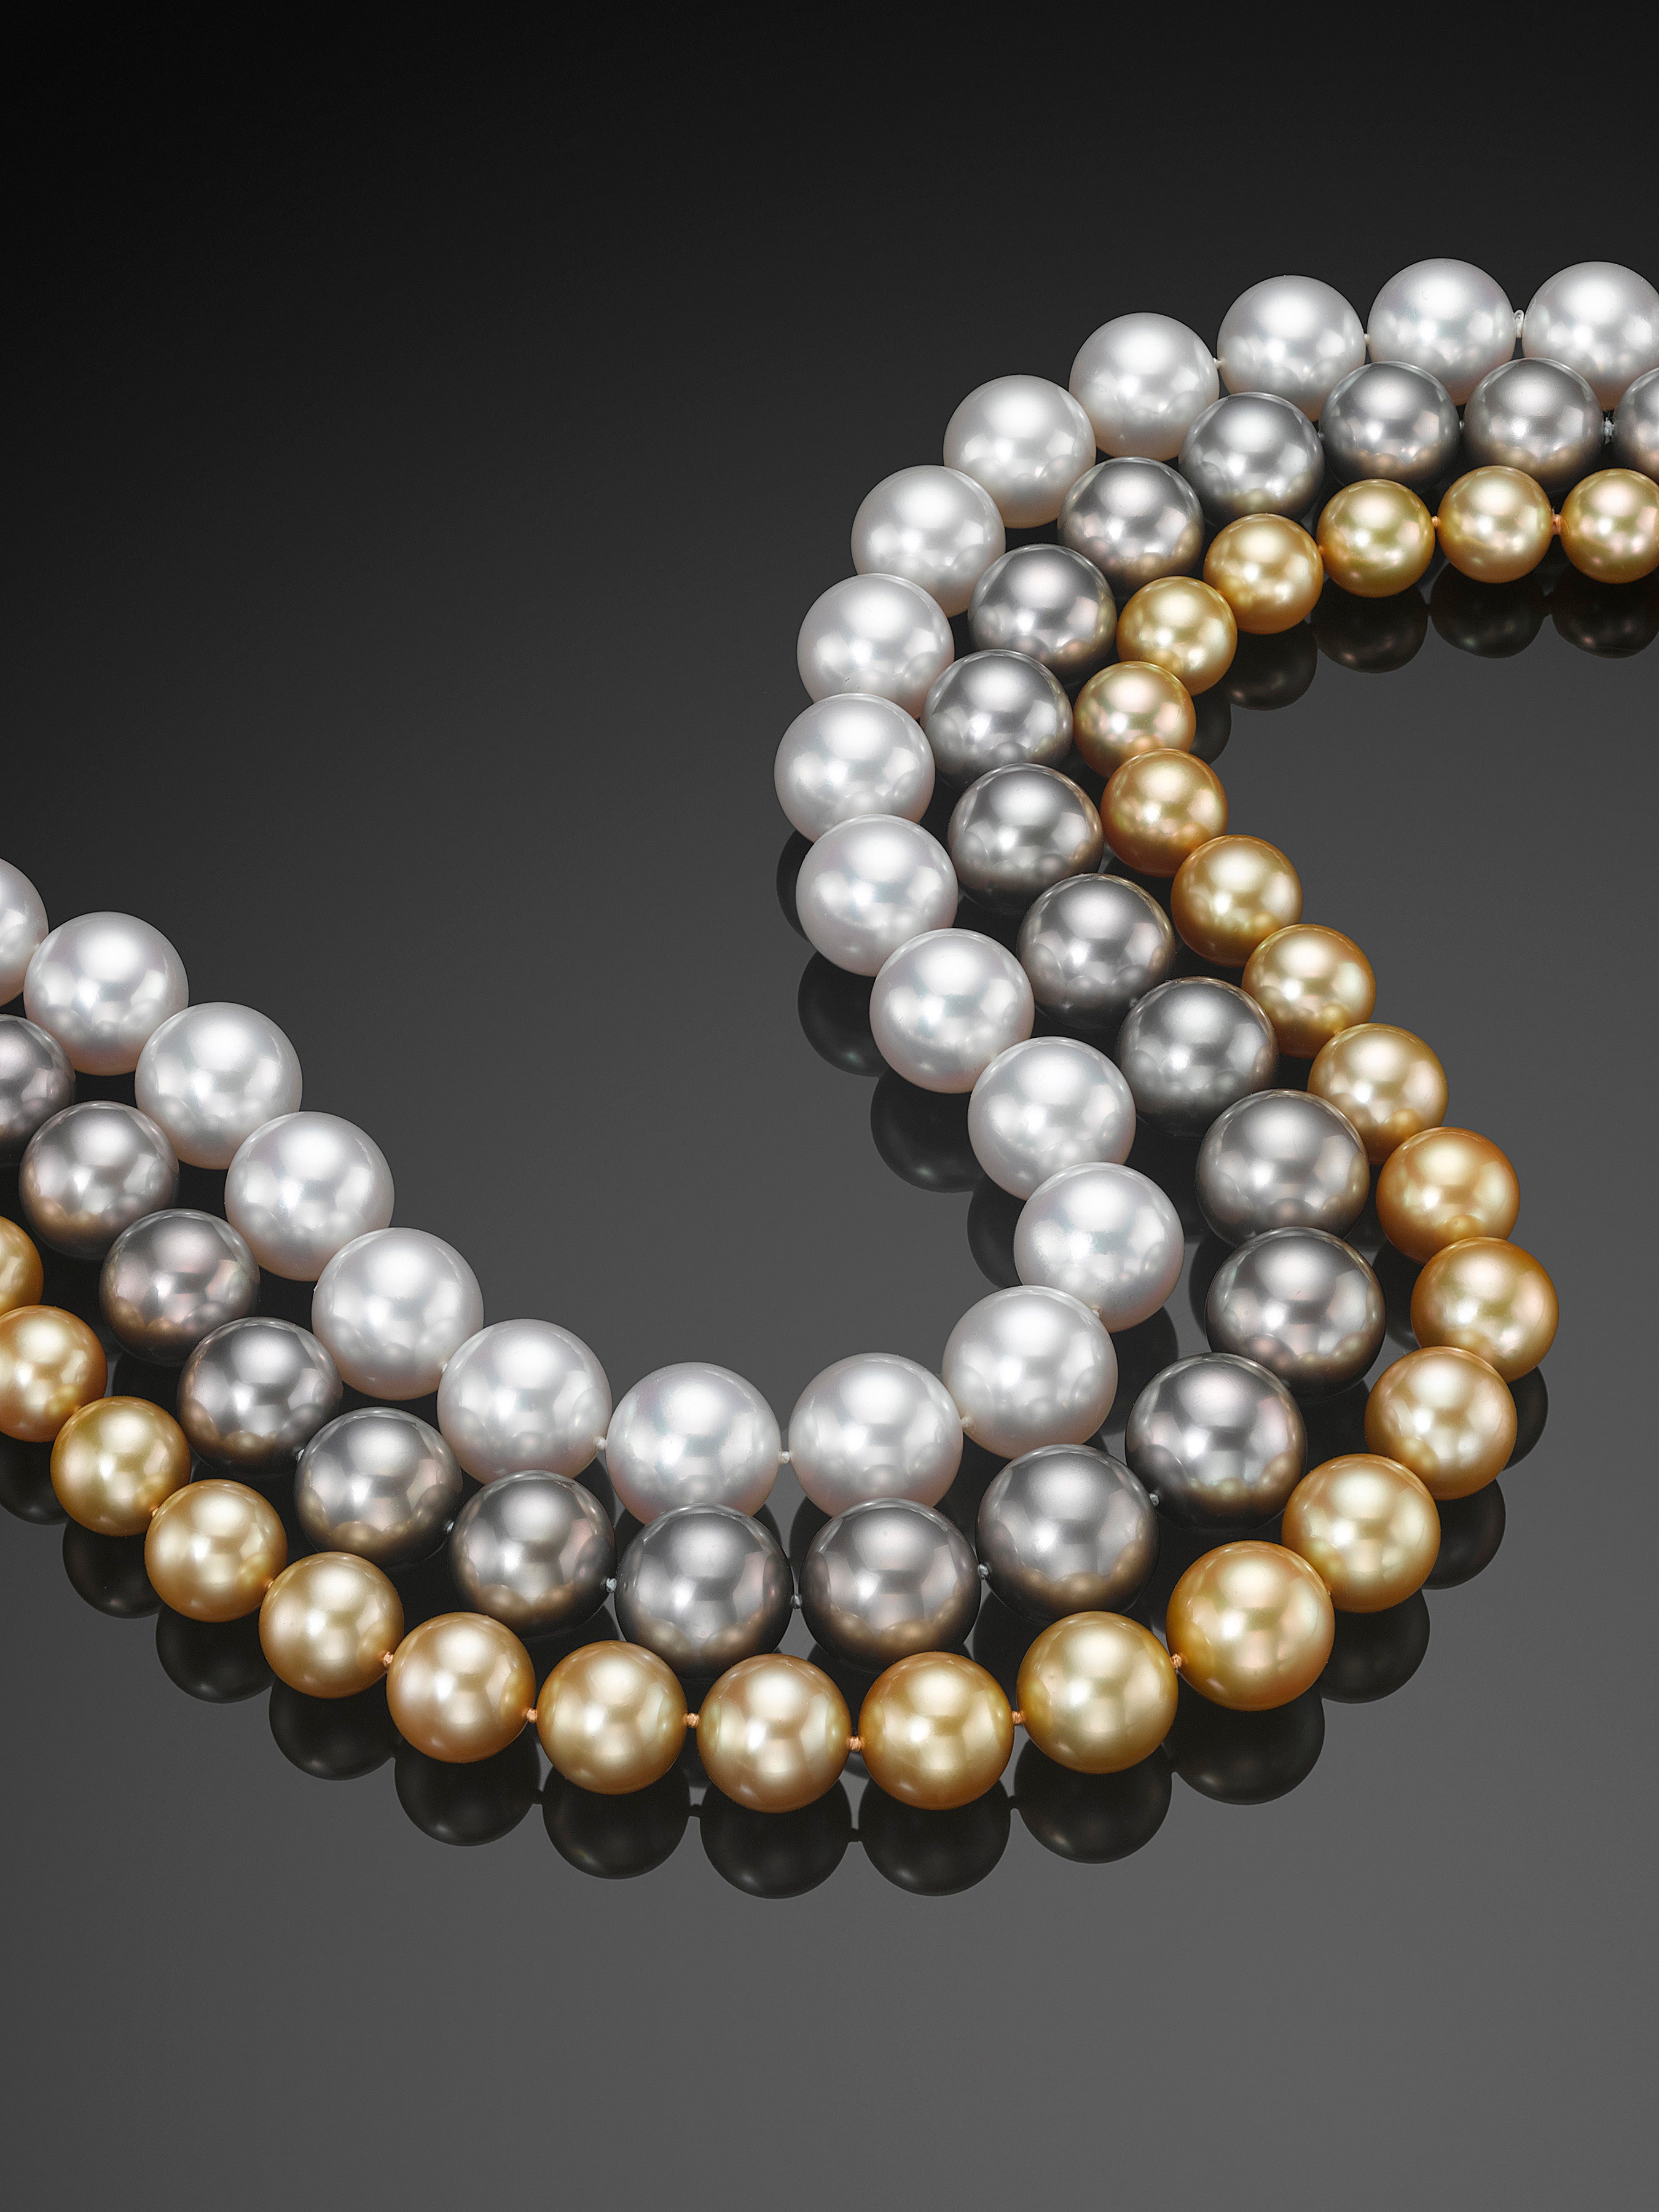 Alchemy Jeweler- Group of Pearl Necklaces 